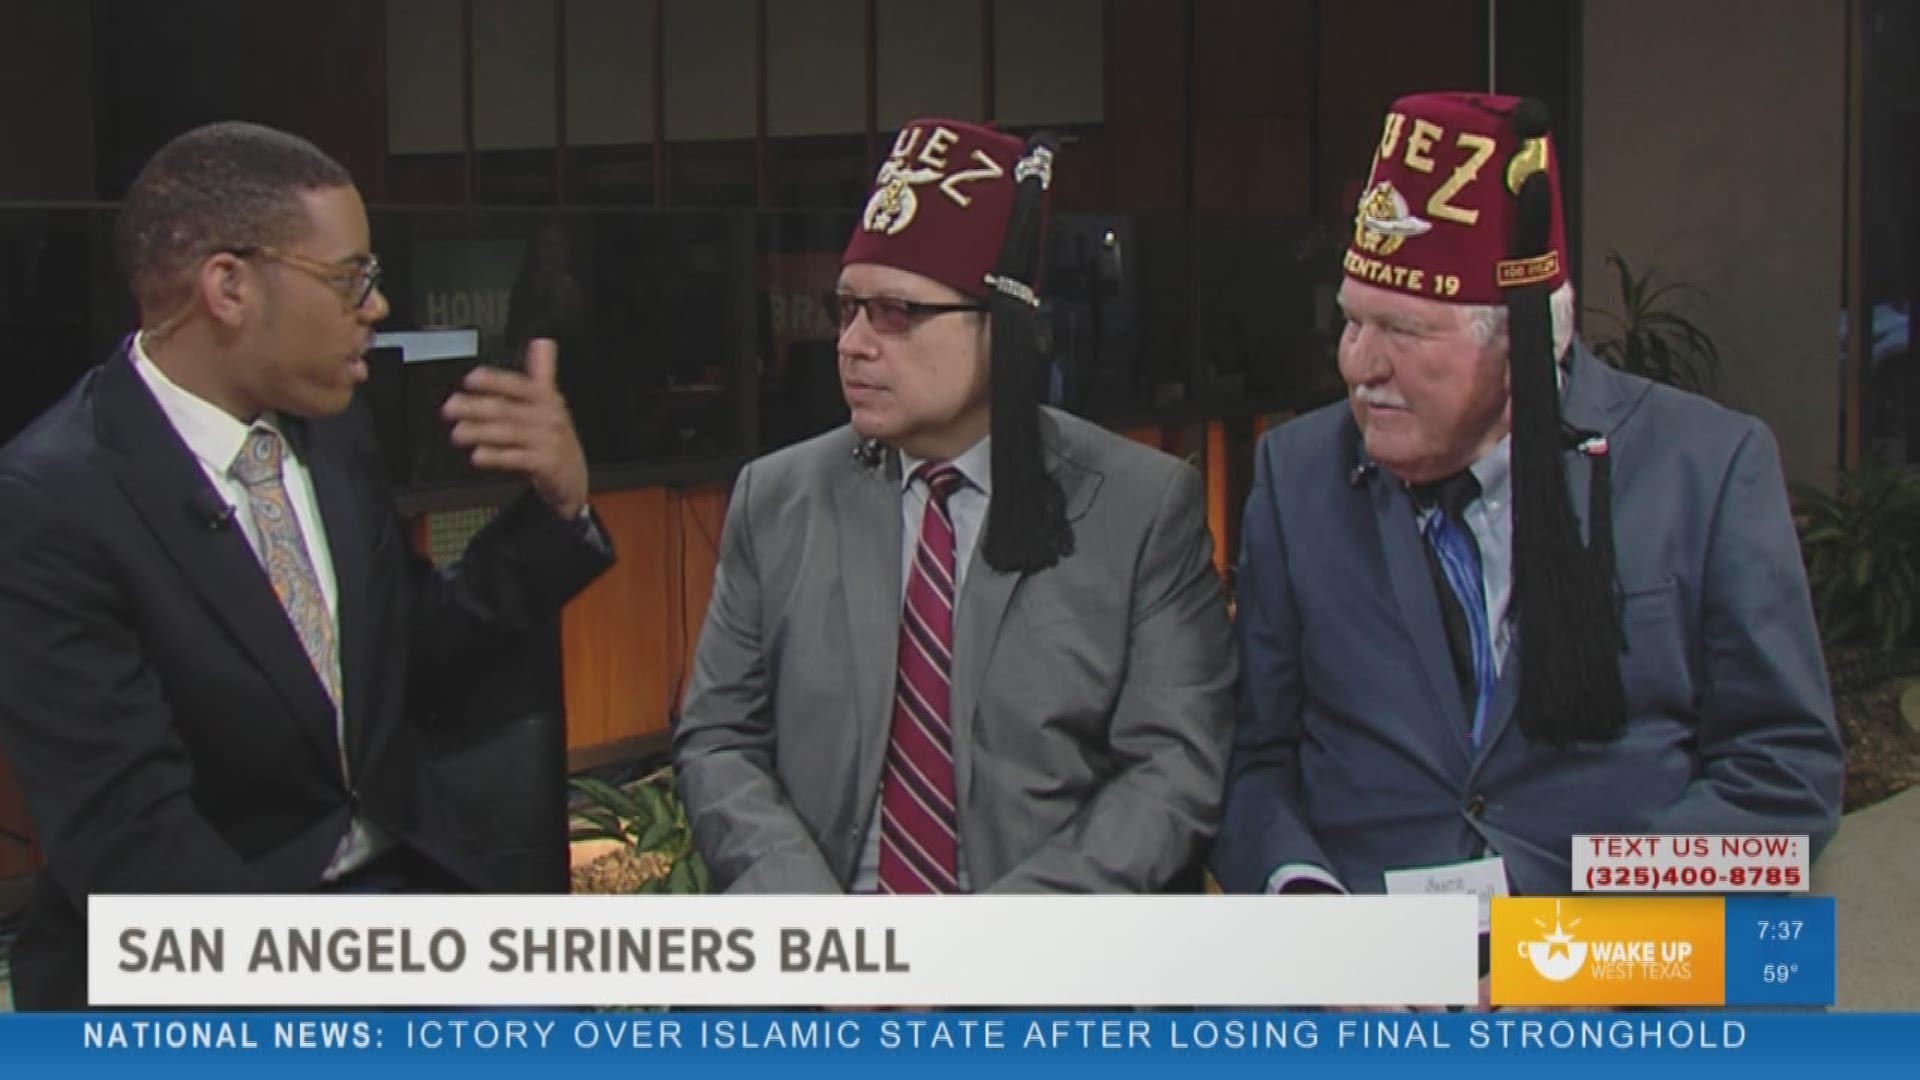 Our Malik Mingo spoke with the San Angelo Shriners about its upcoming event Saturday, March 30, 2019 at the McNease Convention Center.